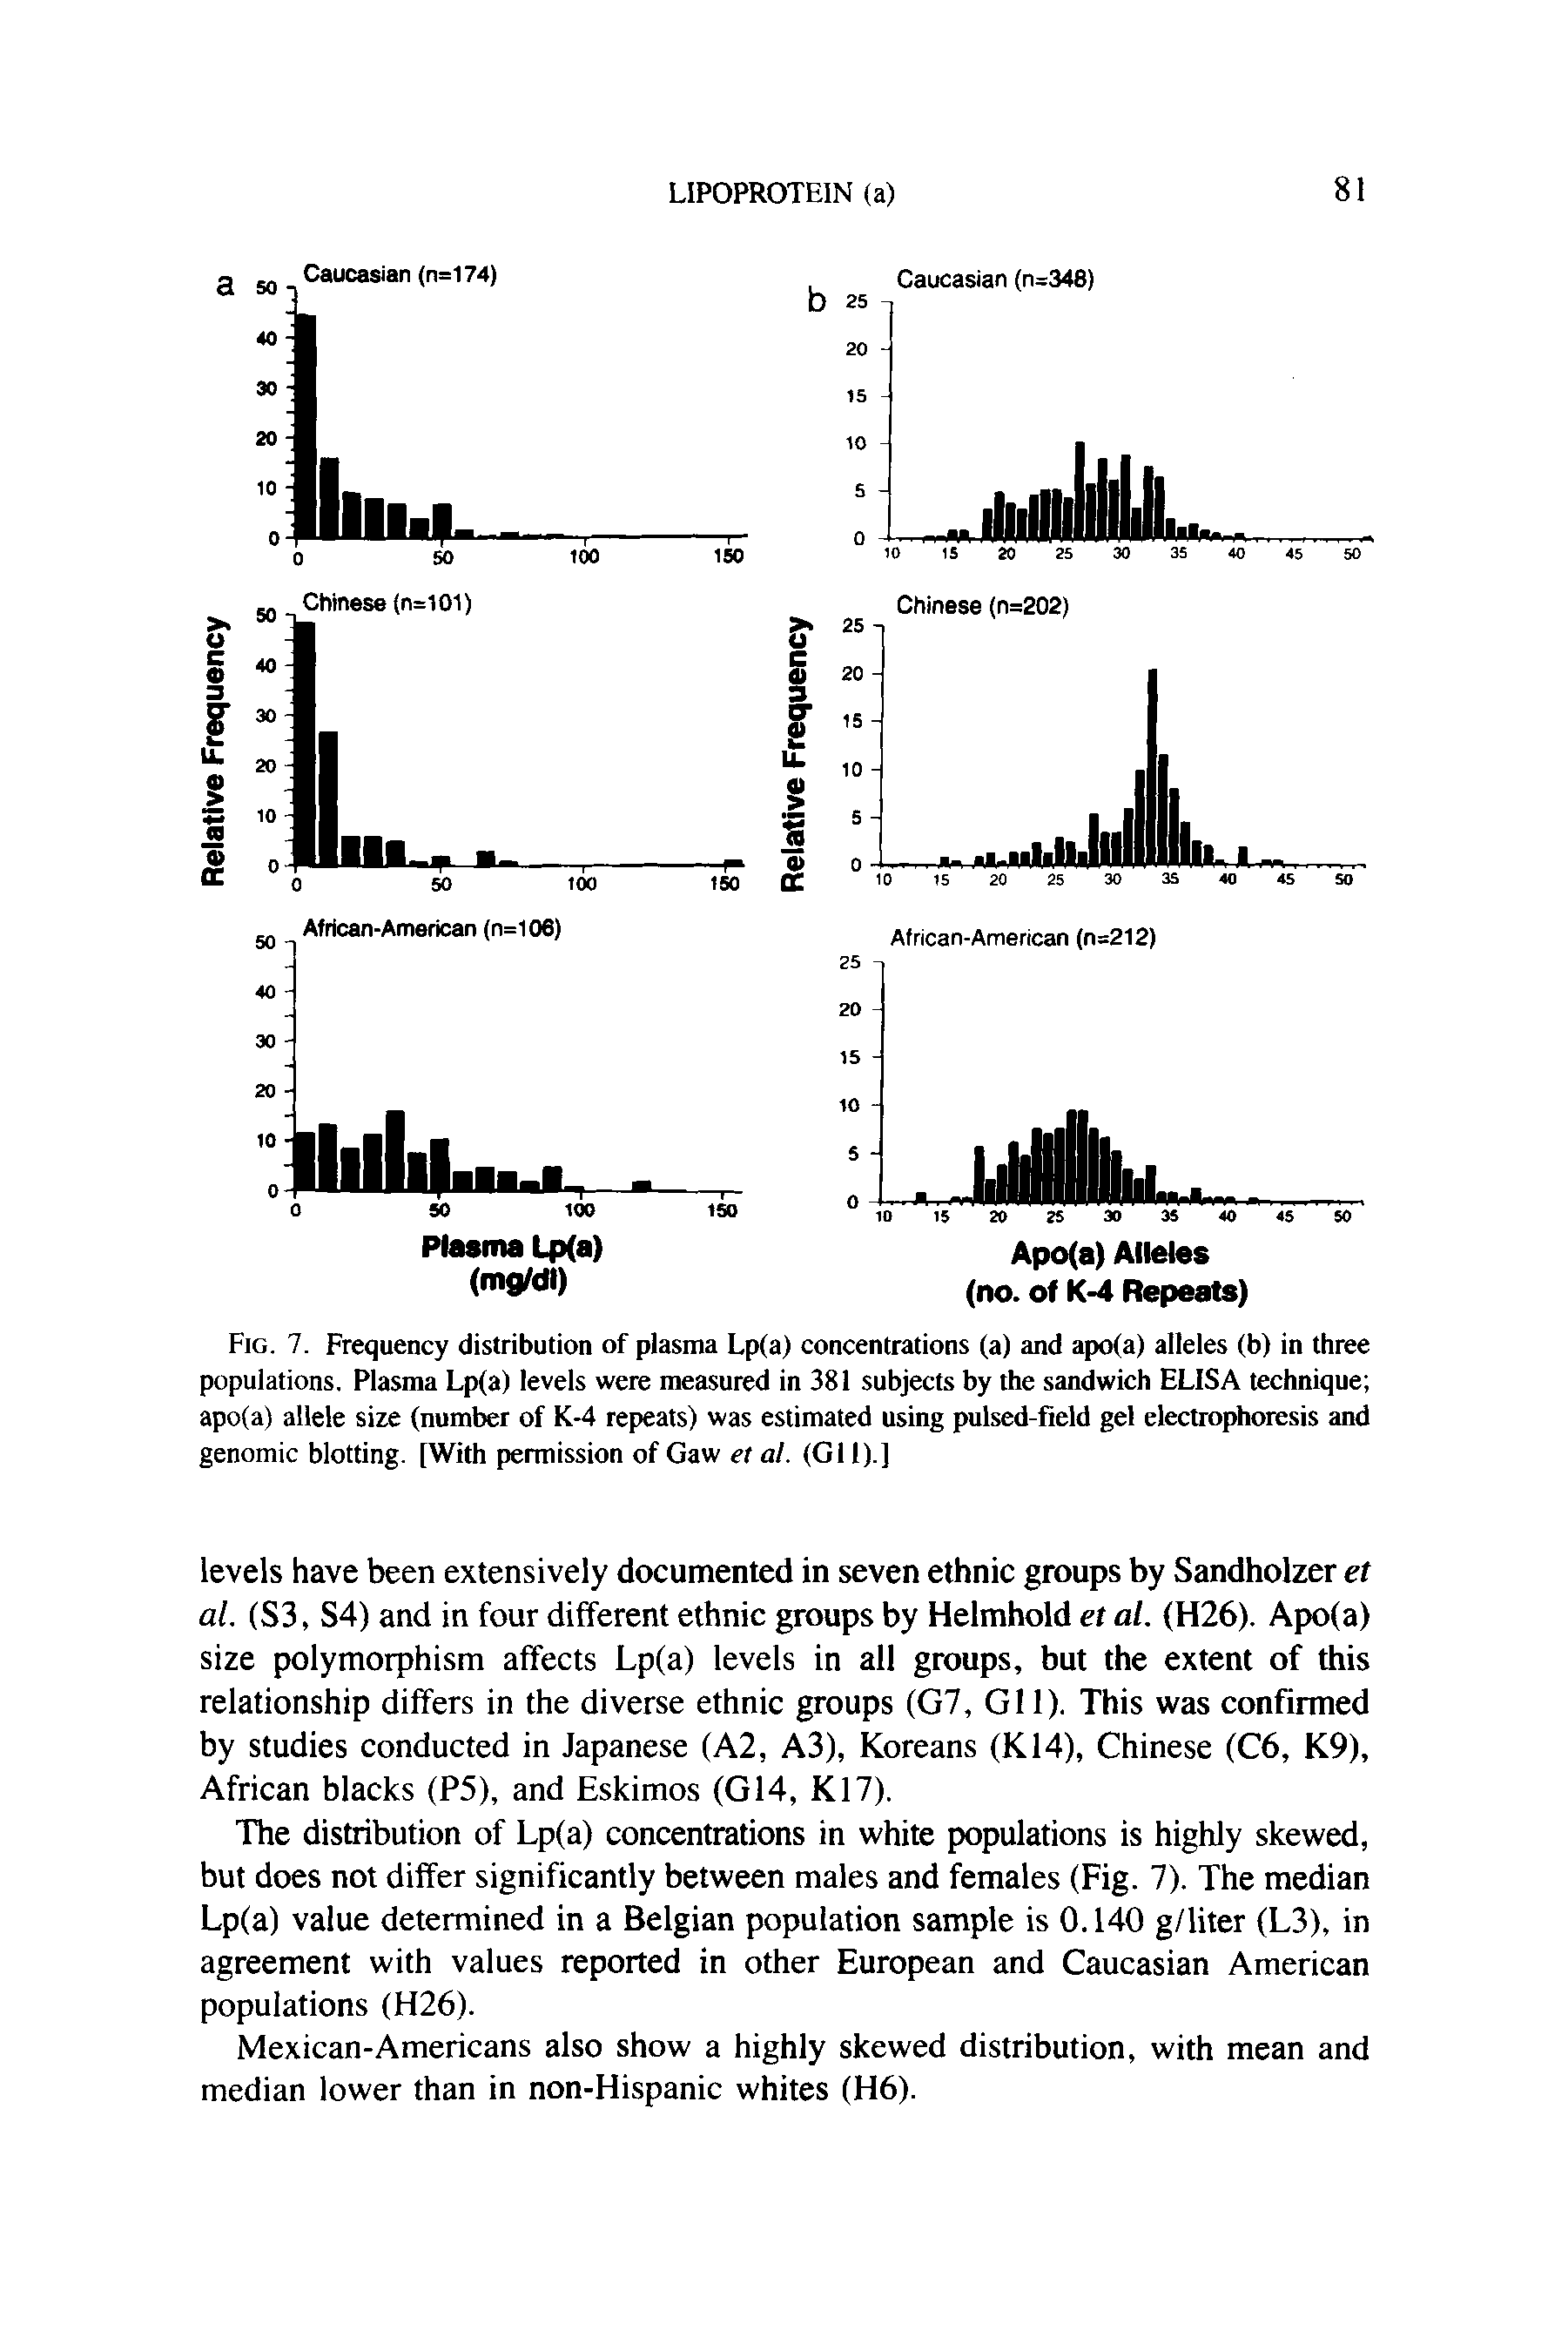 Fig. 7. Frequency distribution of plasma Lp(a) concentrations (a) and apo(a) alleles (b) in three populations. Plasma Lp(a) levels were measured in 381 subjects by the sandwich ELISA technique apo(a) allele size (number of K-4 repeats) was estimated using pulsed-field gel electrophoresis and genomic blotting. [With permission of Gaw et at. (G11).]...